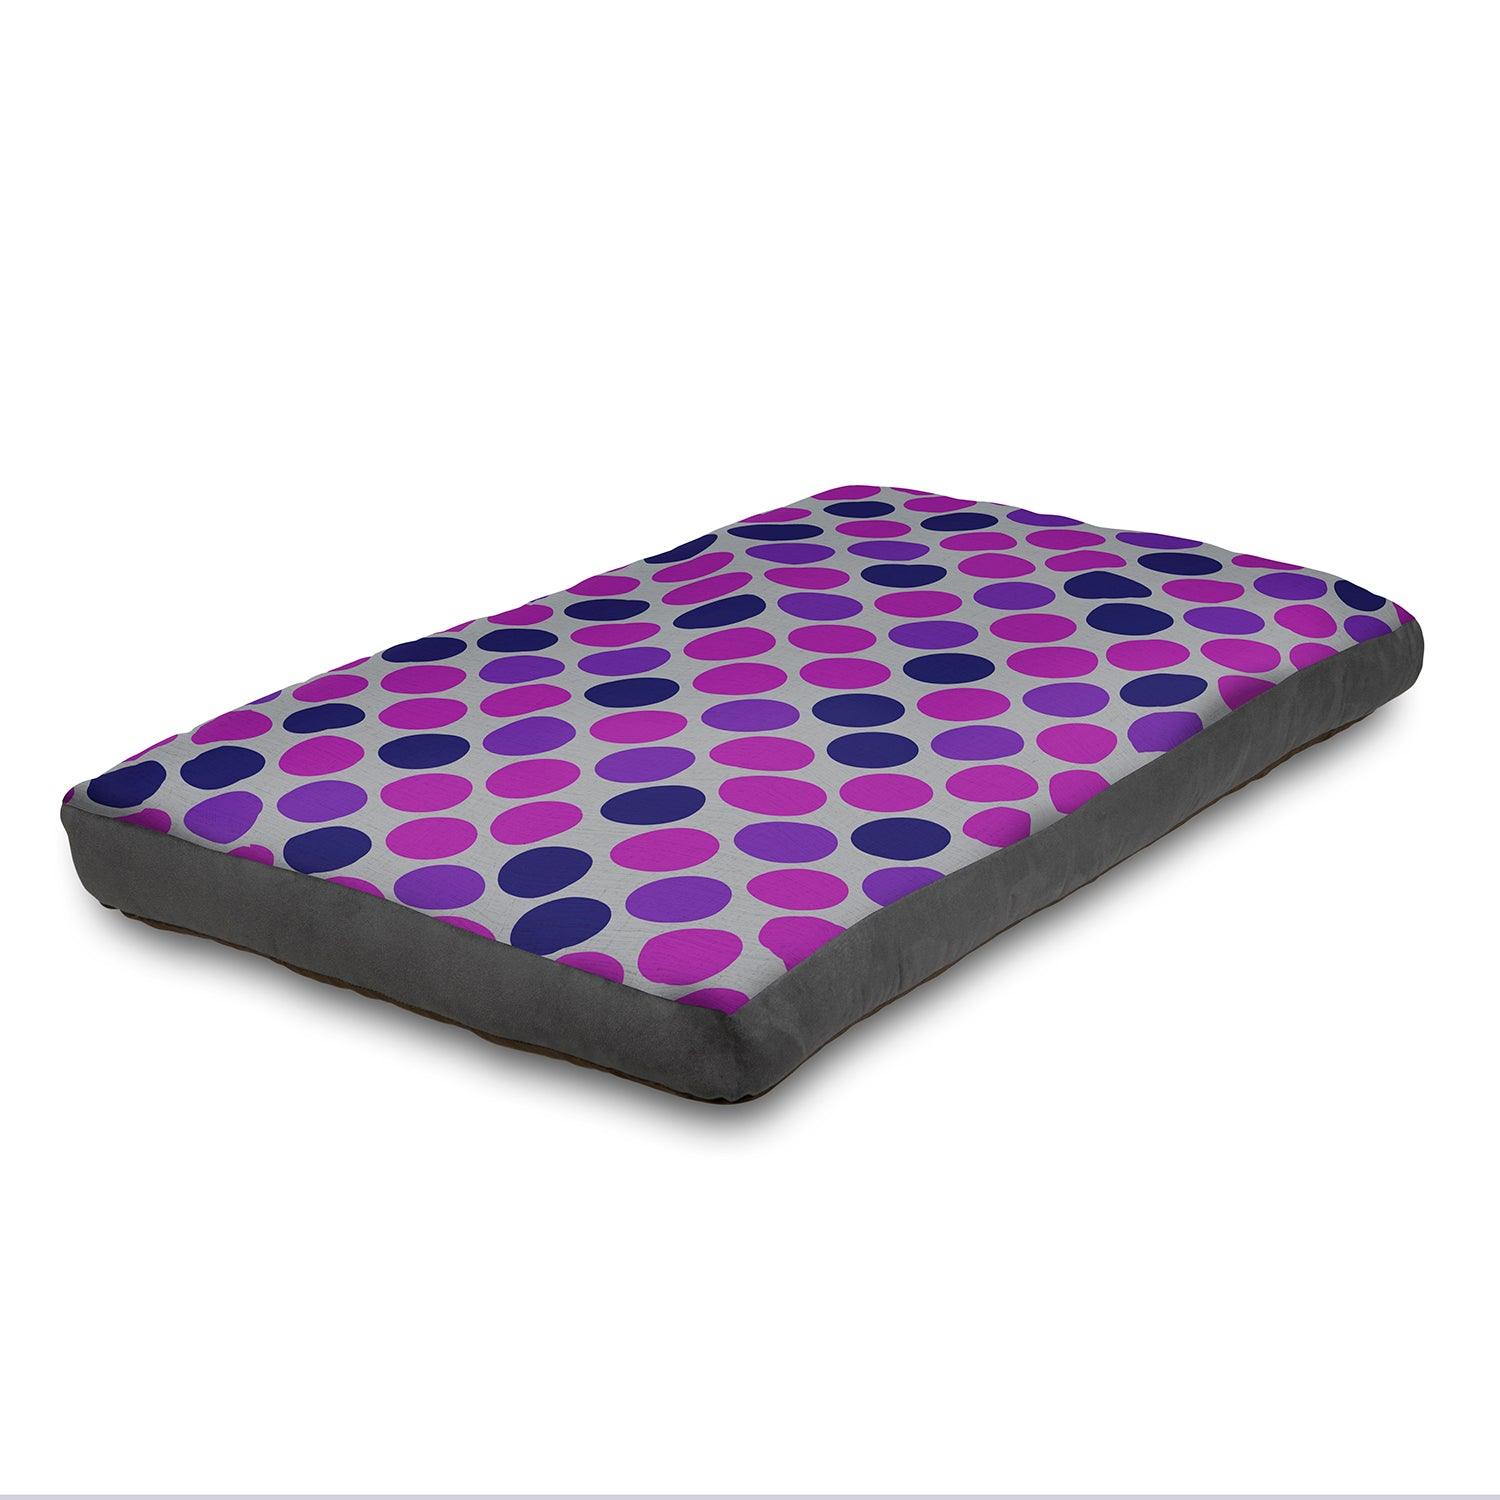 View Super Comfy Dog Bed Soft and Fluffy with Washable Cover Small 75 x 50 cm Circles information